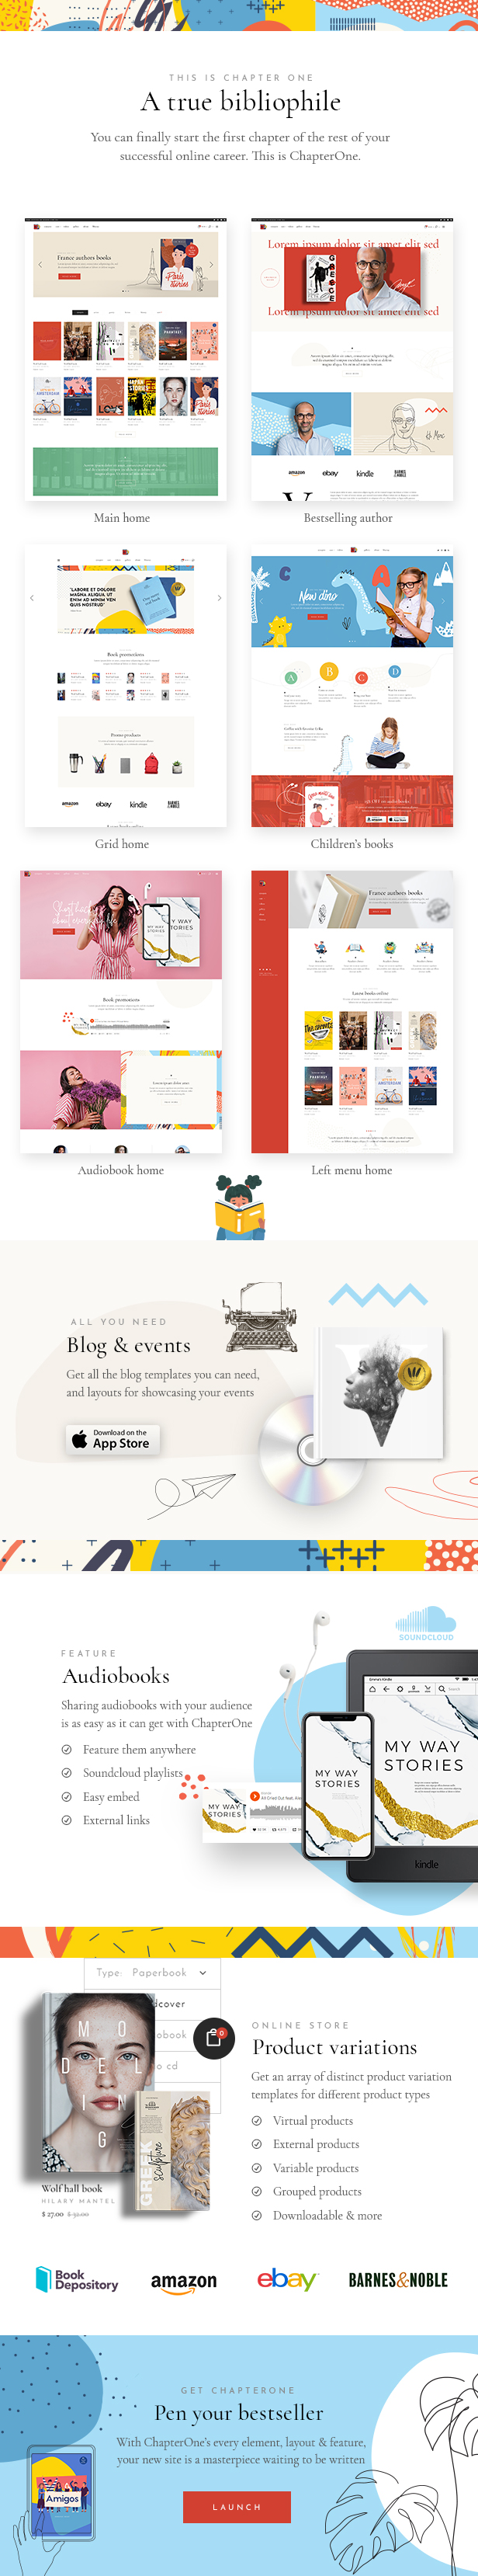 ChapterOne - Bookstore and Publisher Theme - 1